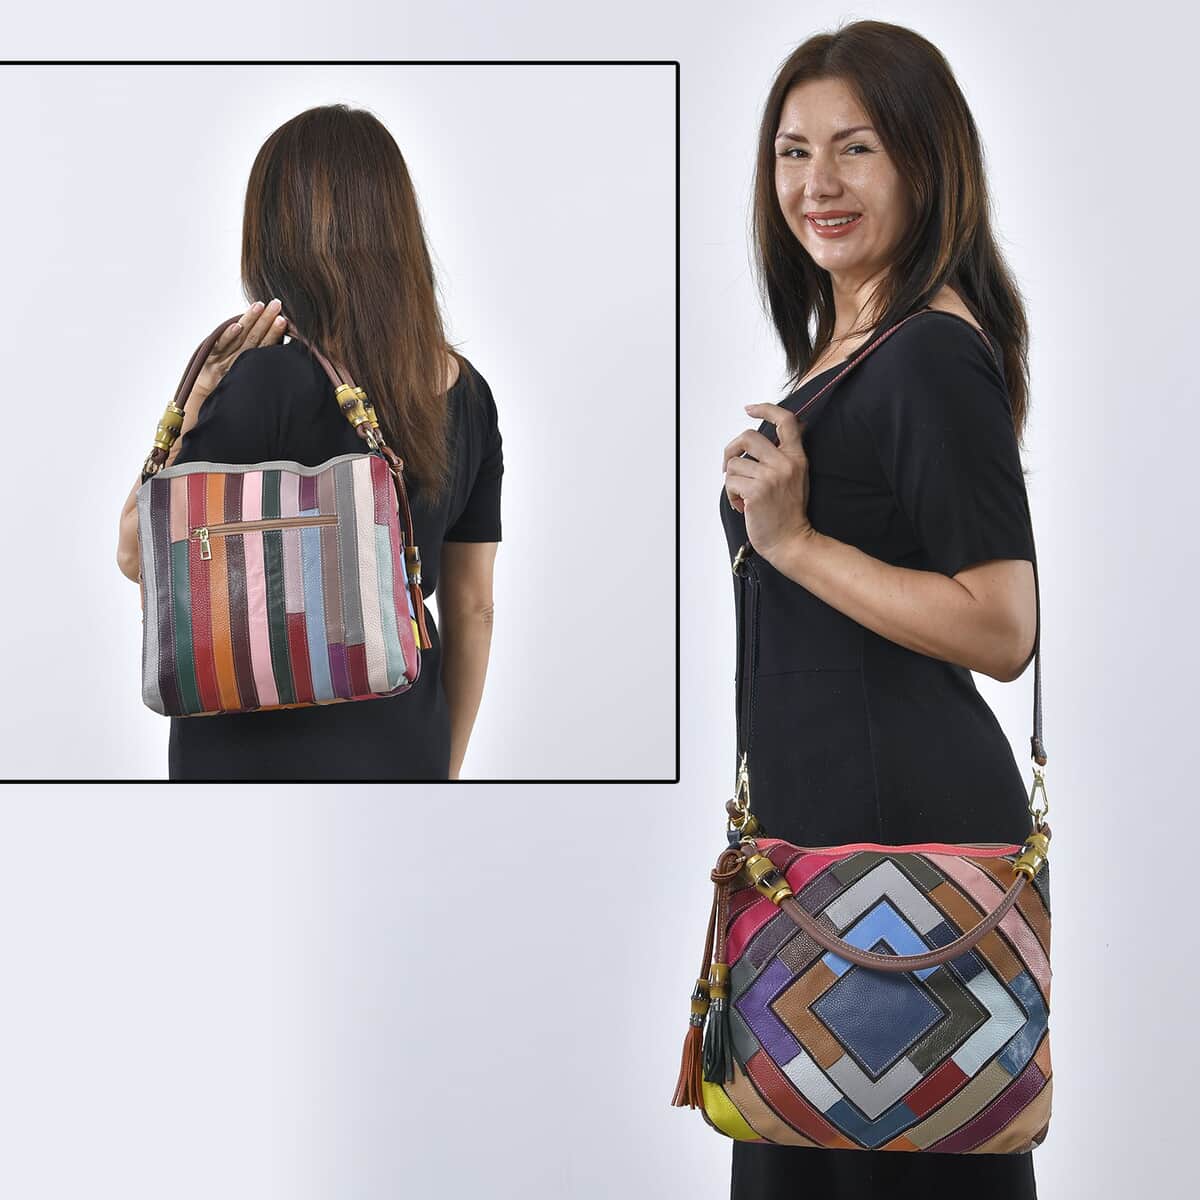 Rainbow Color Genuine Leather Tote Bag (14"x4"x11") with Handle Drop and Detachable Shoulder Strap image number 1